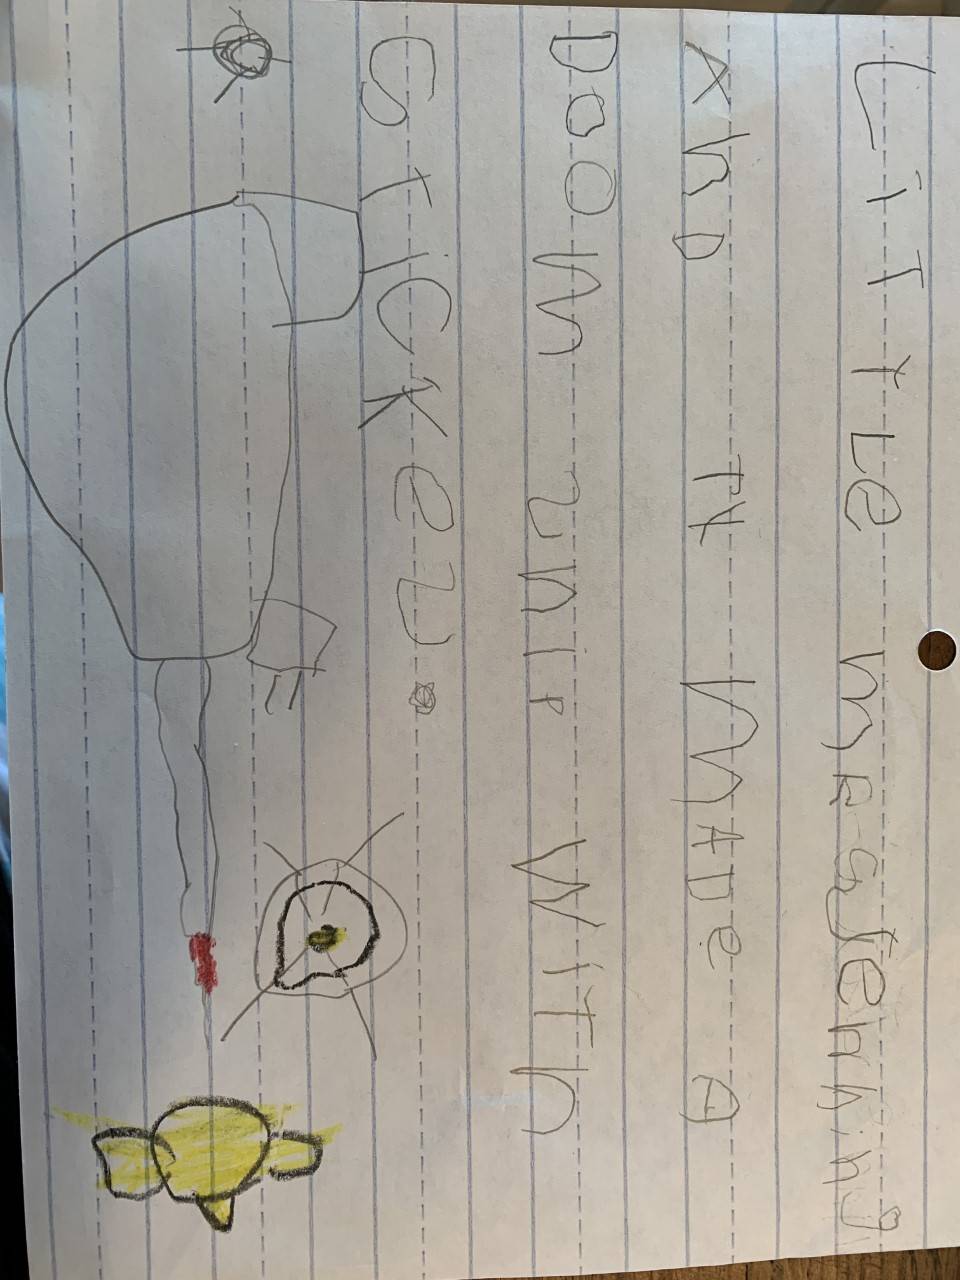 A special letter from a student.